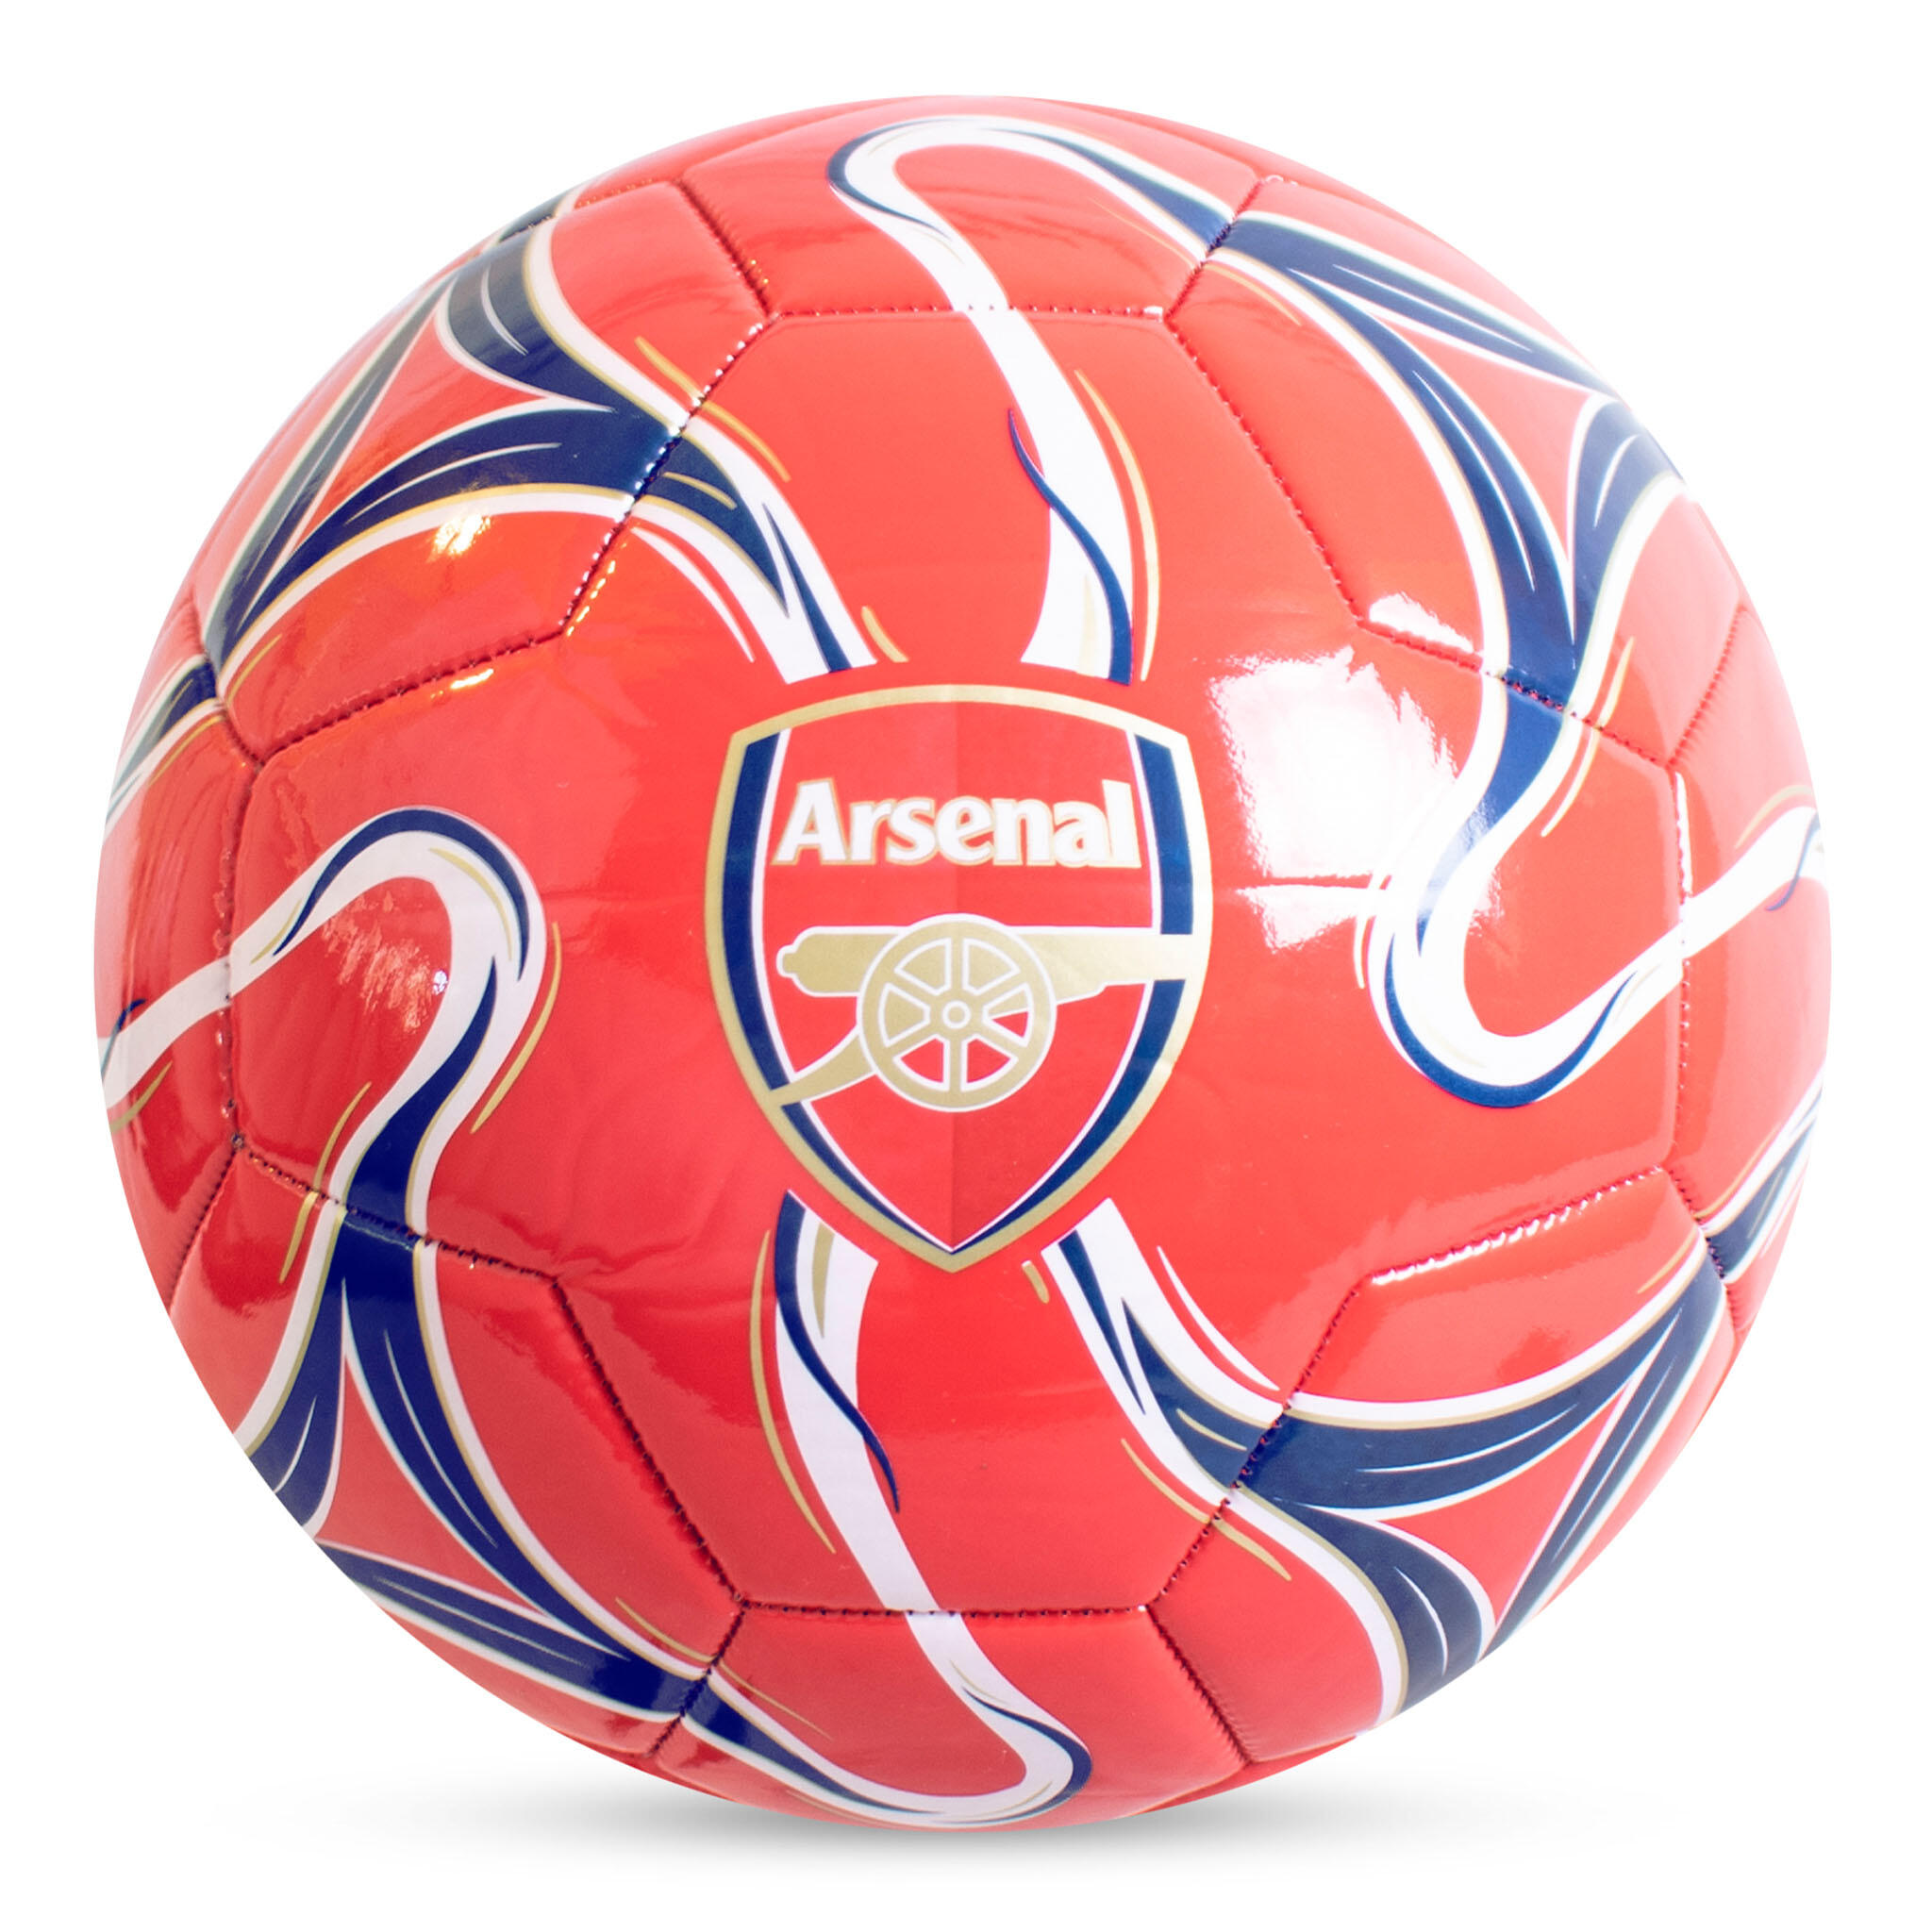 HY-PRO Arsenal 26 Panel Size 5 Cosmos Ball - Red